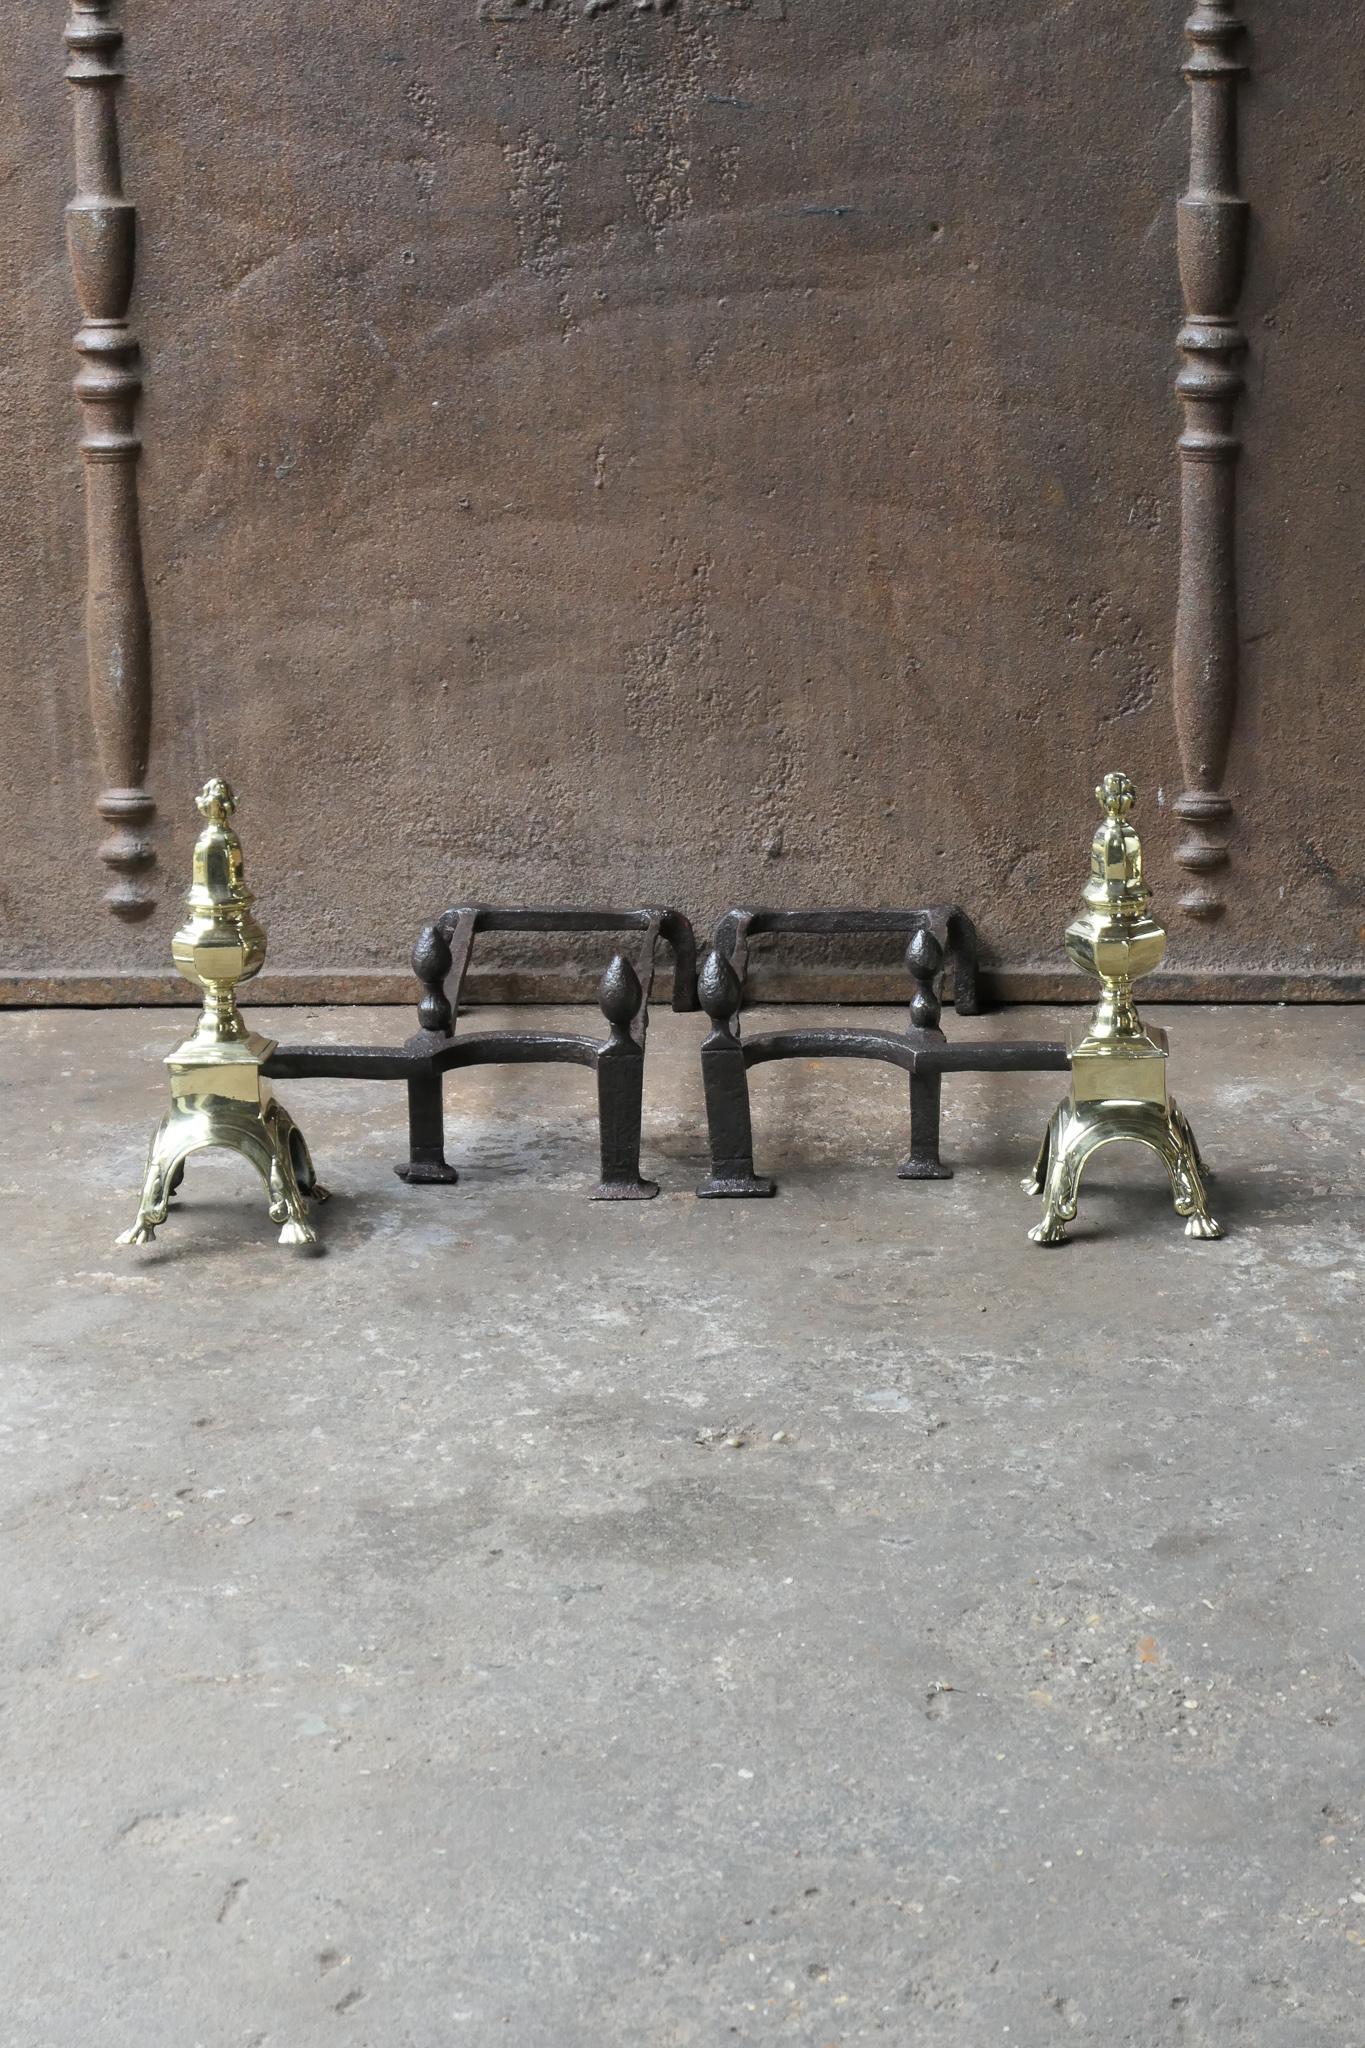 17th century French Louis XIV period fireplace basket - fire basket made of bronze and wrought iron. 

The basket is in a good condition and is fully functional.